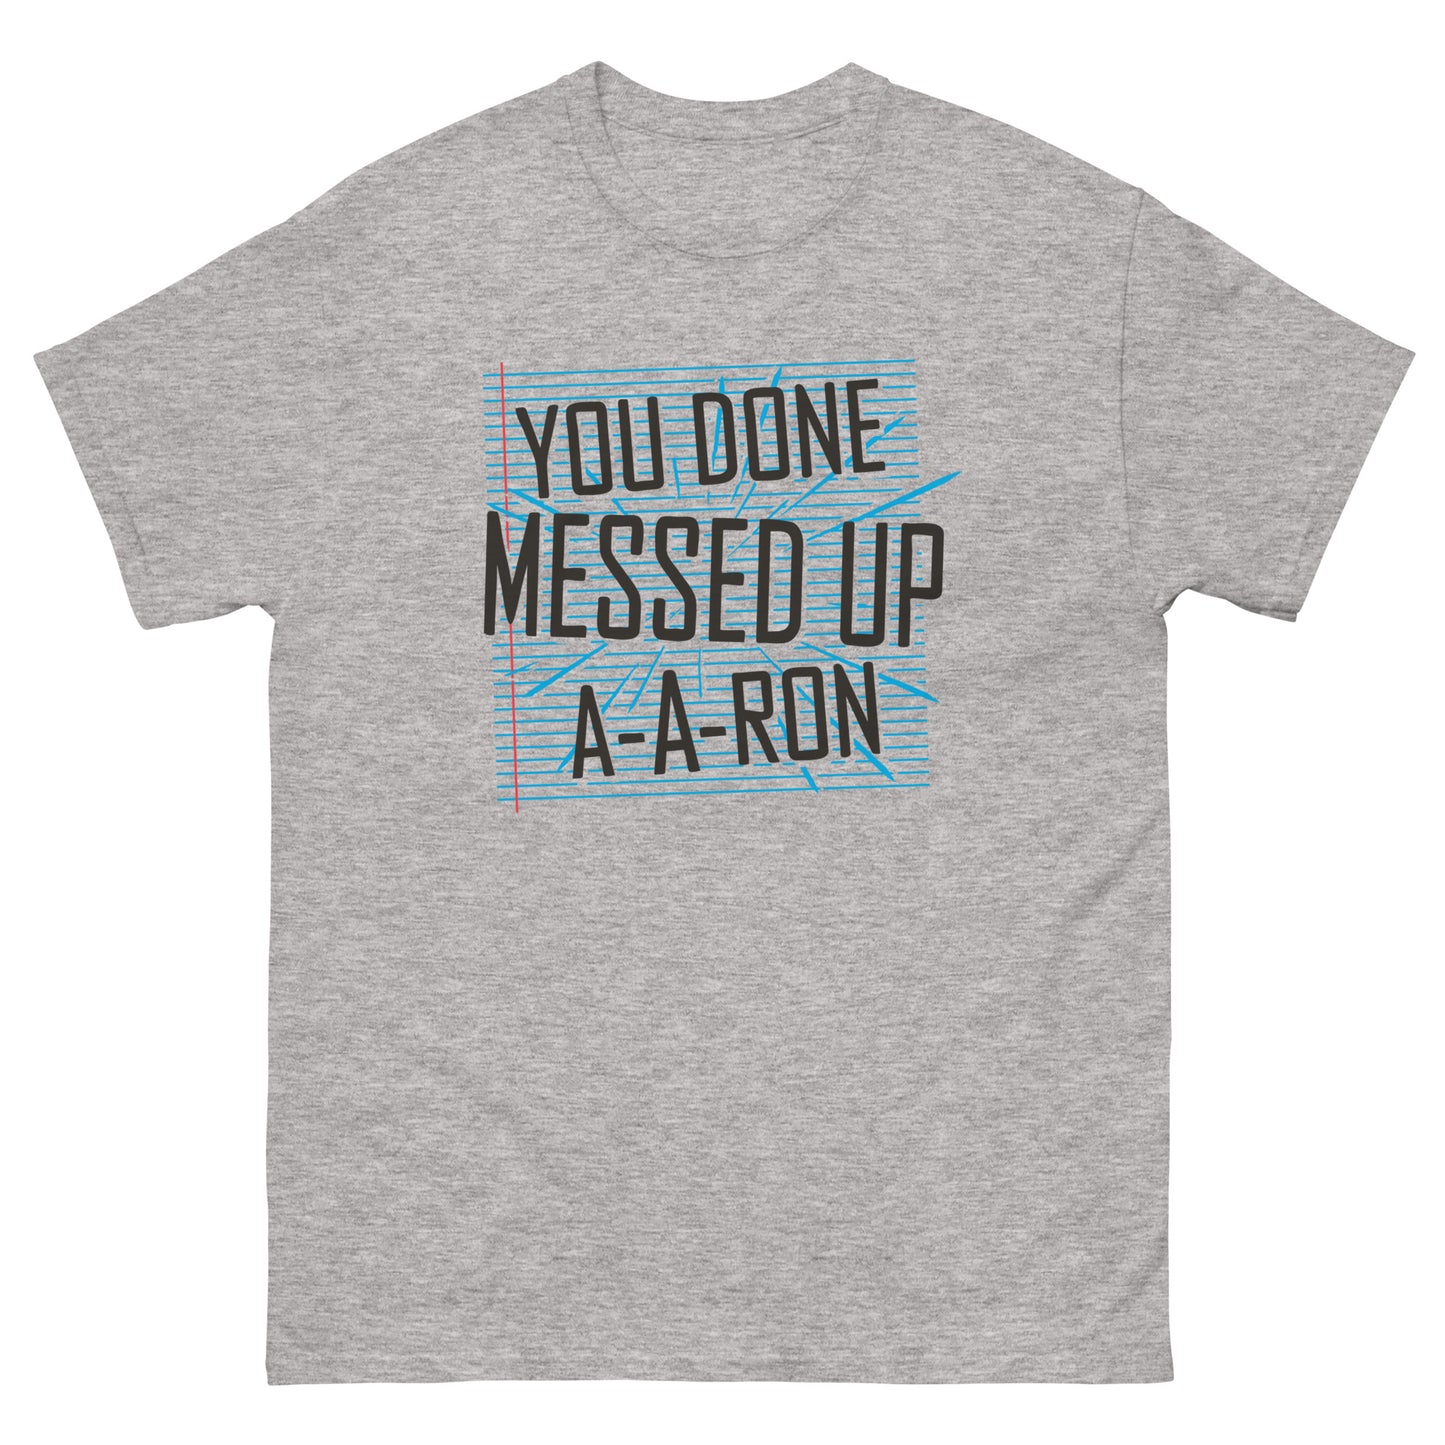 You Done Messed Up A-A-Ron Men's Classic Tee